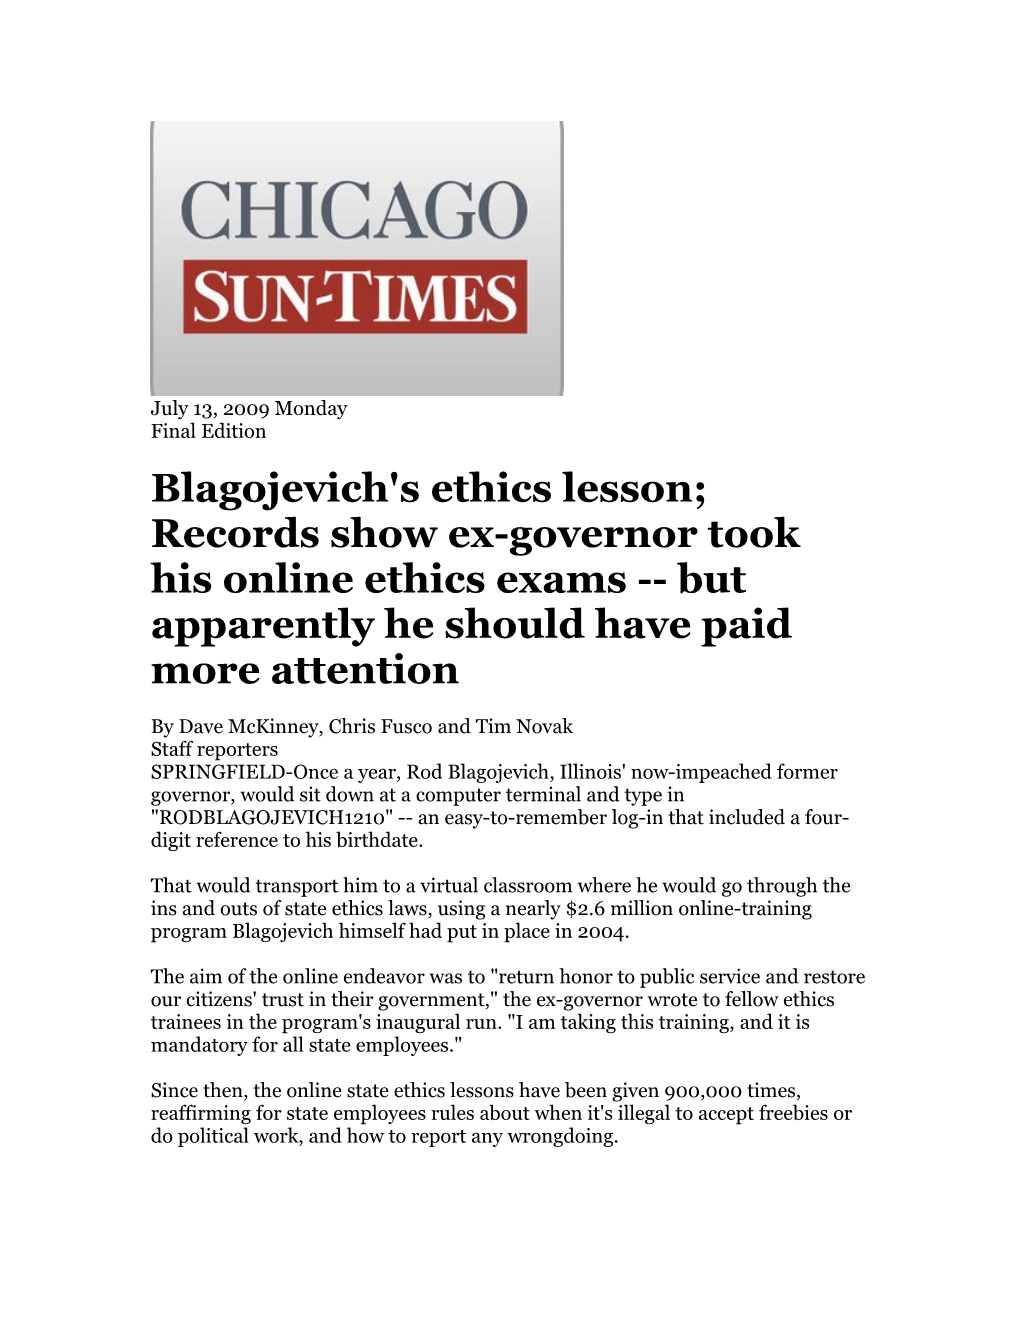 Blagojevich's Ethics Lesson; Records Show Ex-Governor Took His Online Ethics Exams But